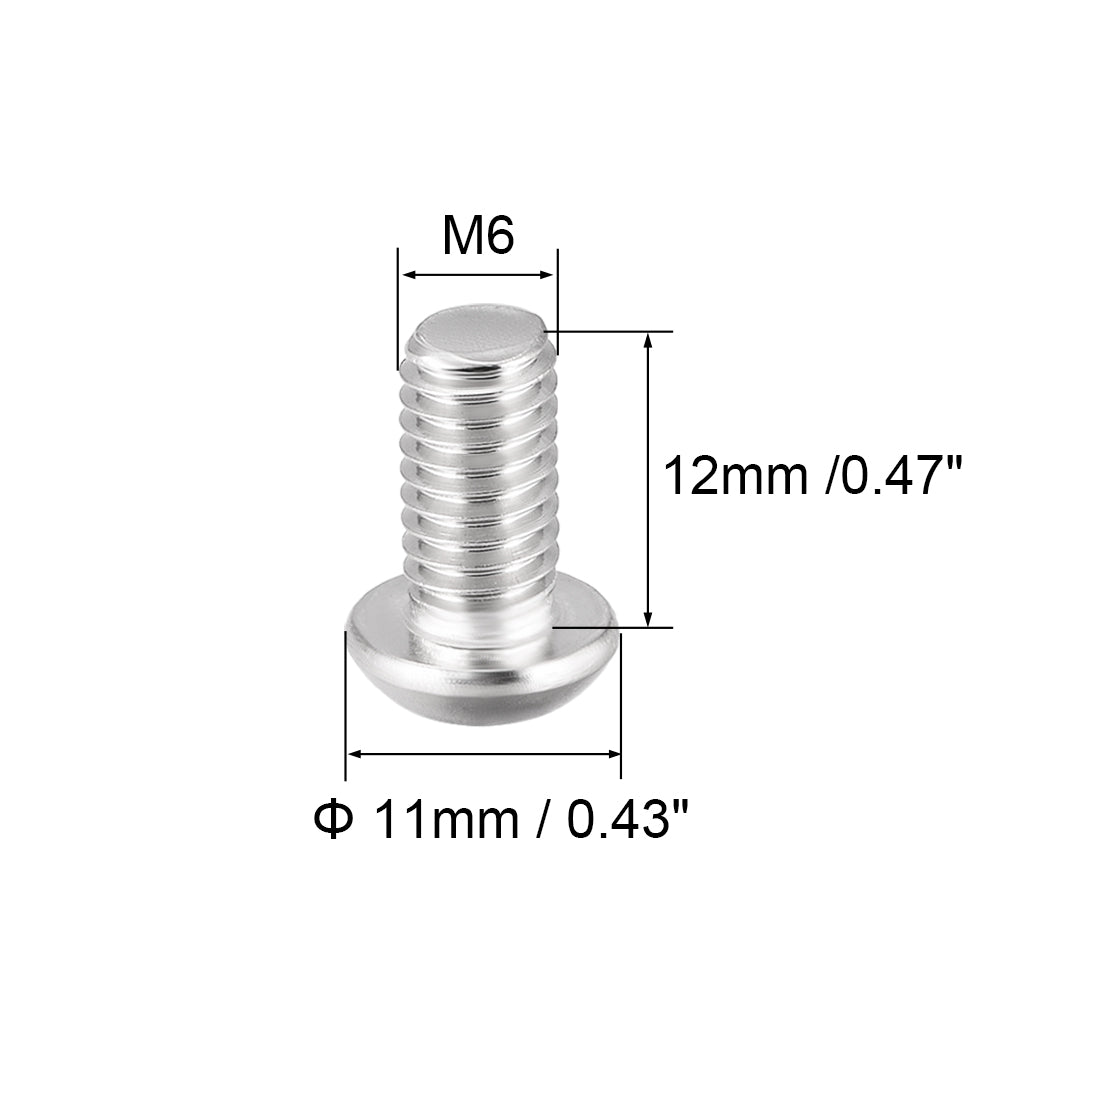 uxcell Uxcell M6x12mm Machine Screws Hex Socket Round Head Screw 304 Stainless Steel Fasteners Bolts 20pcs